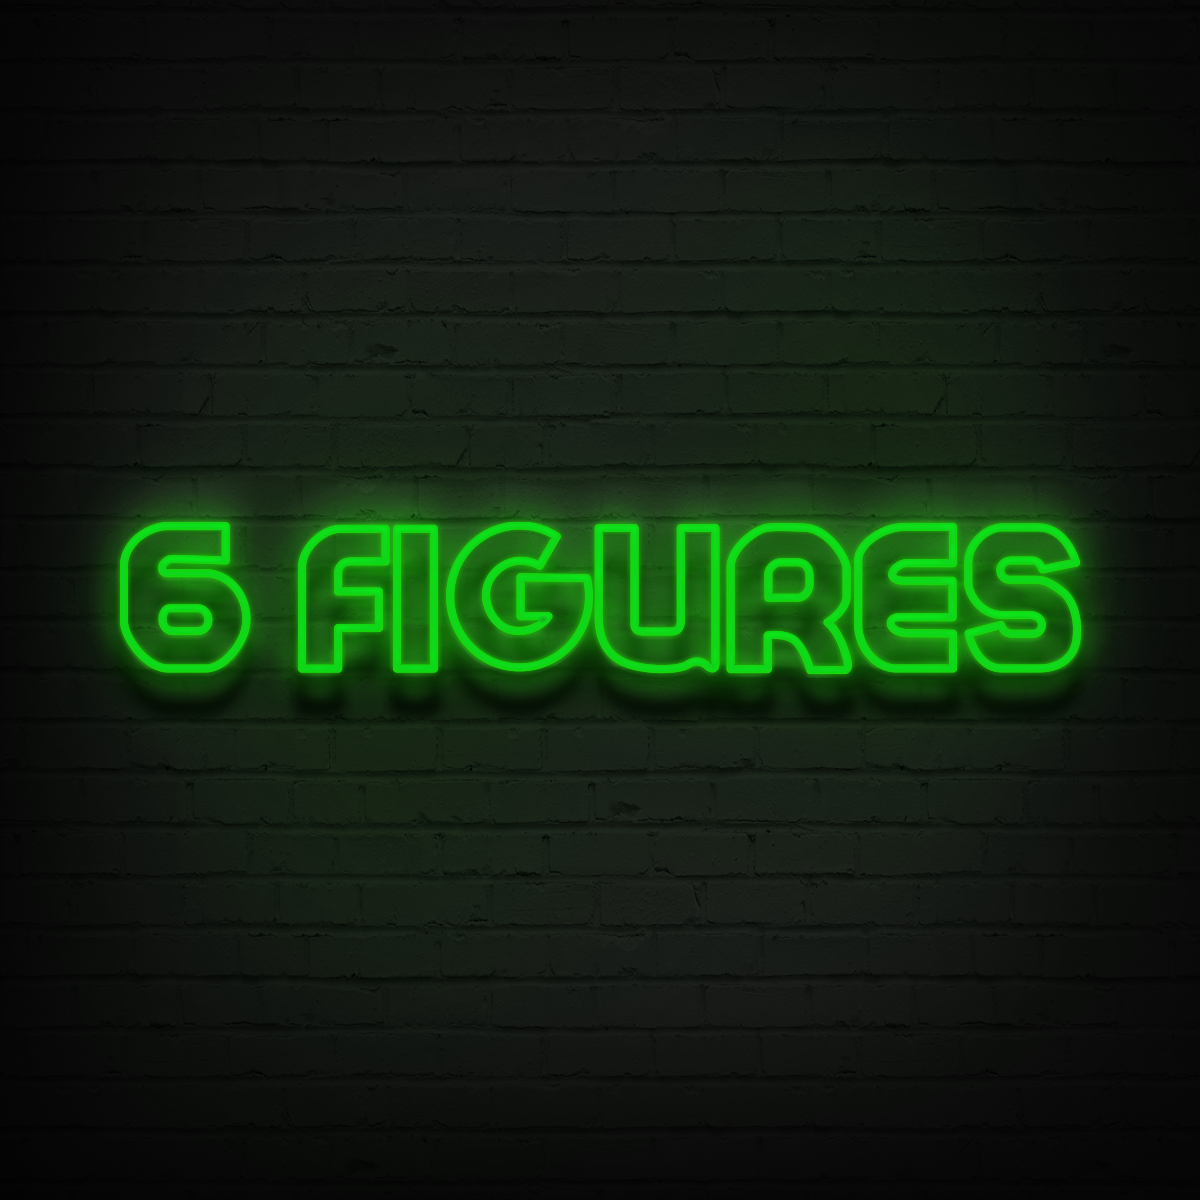 '6 Figures' LED Neon Sign